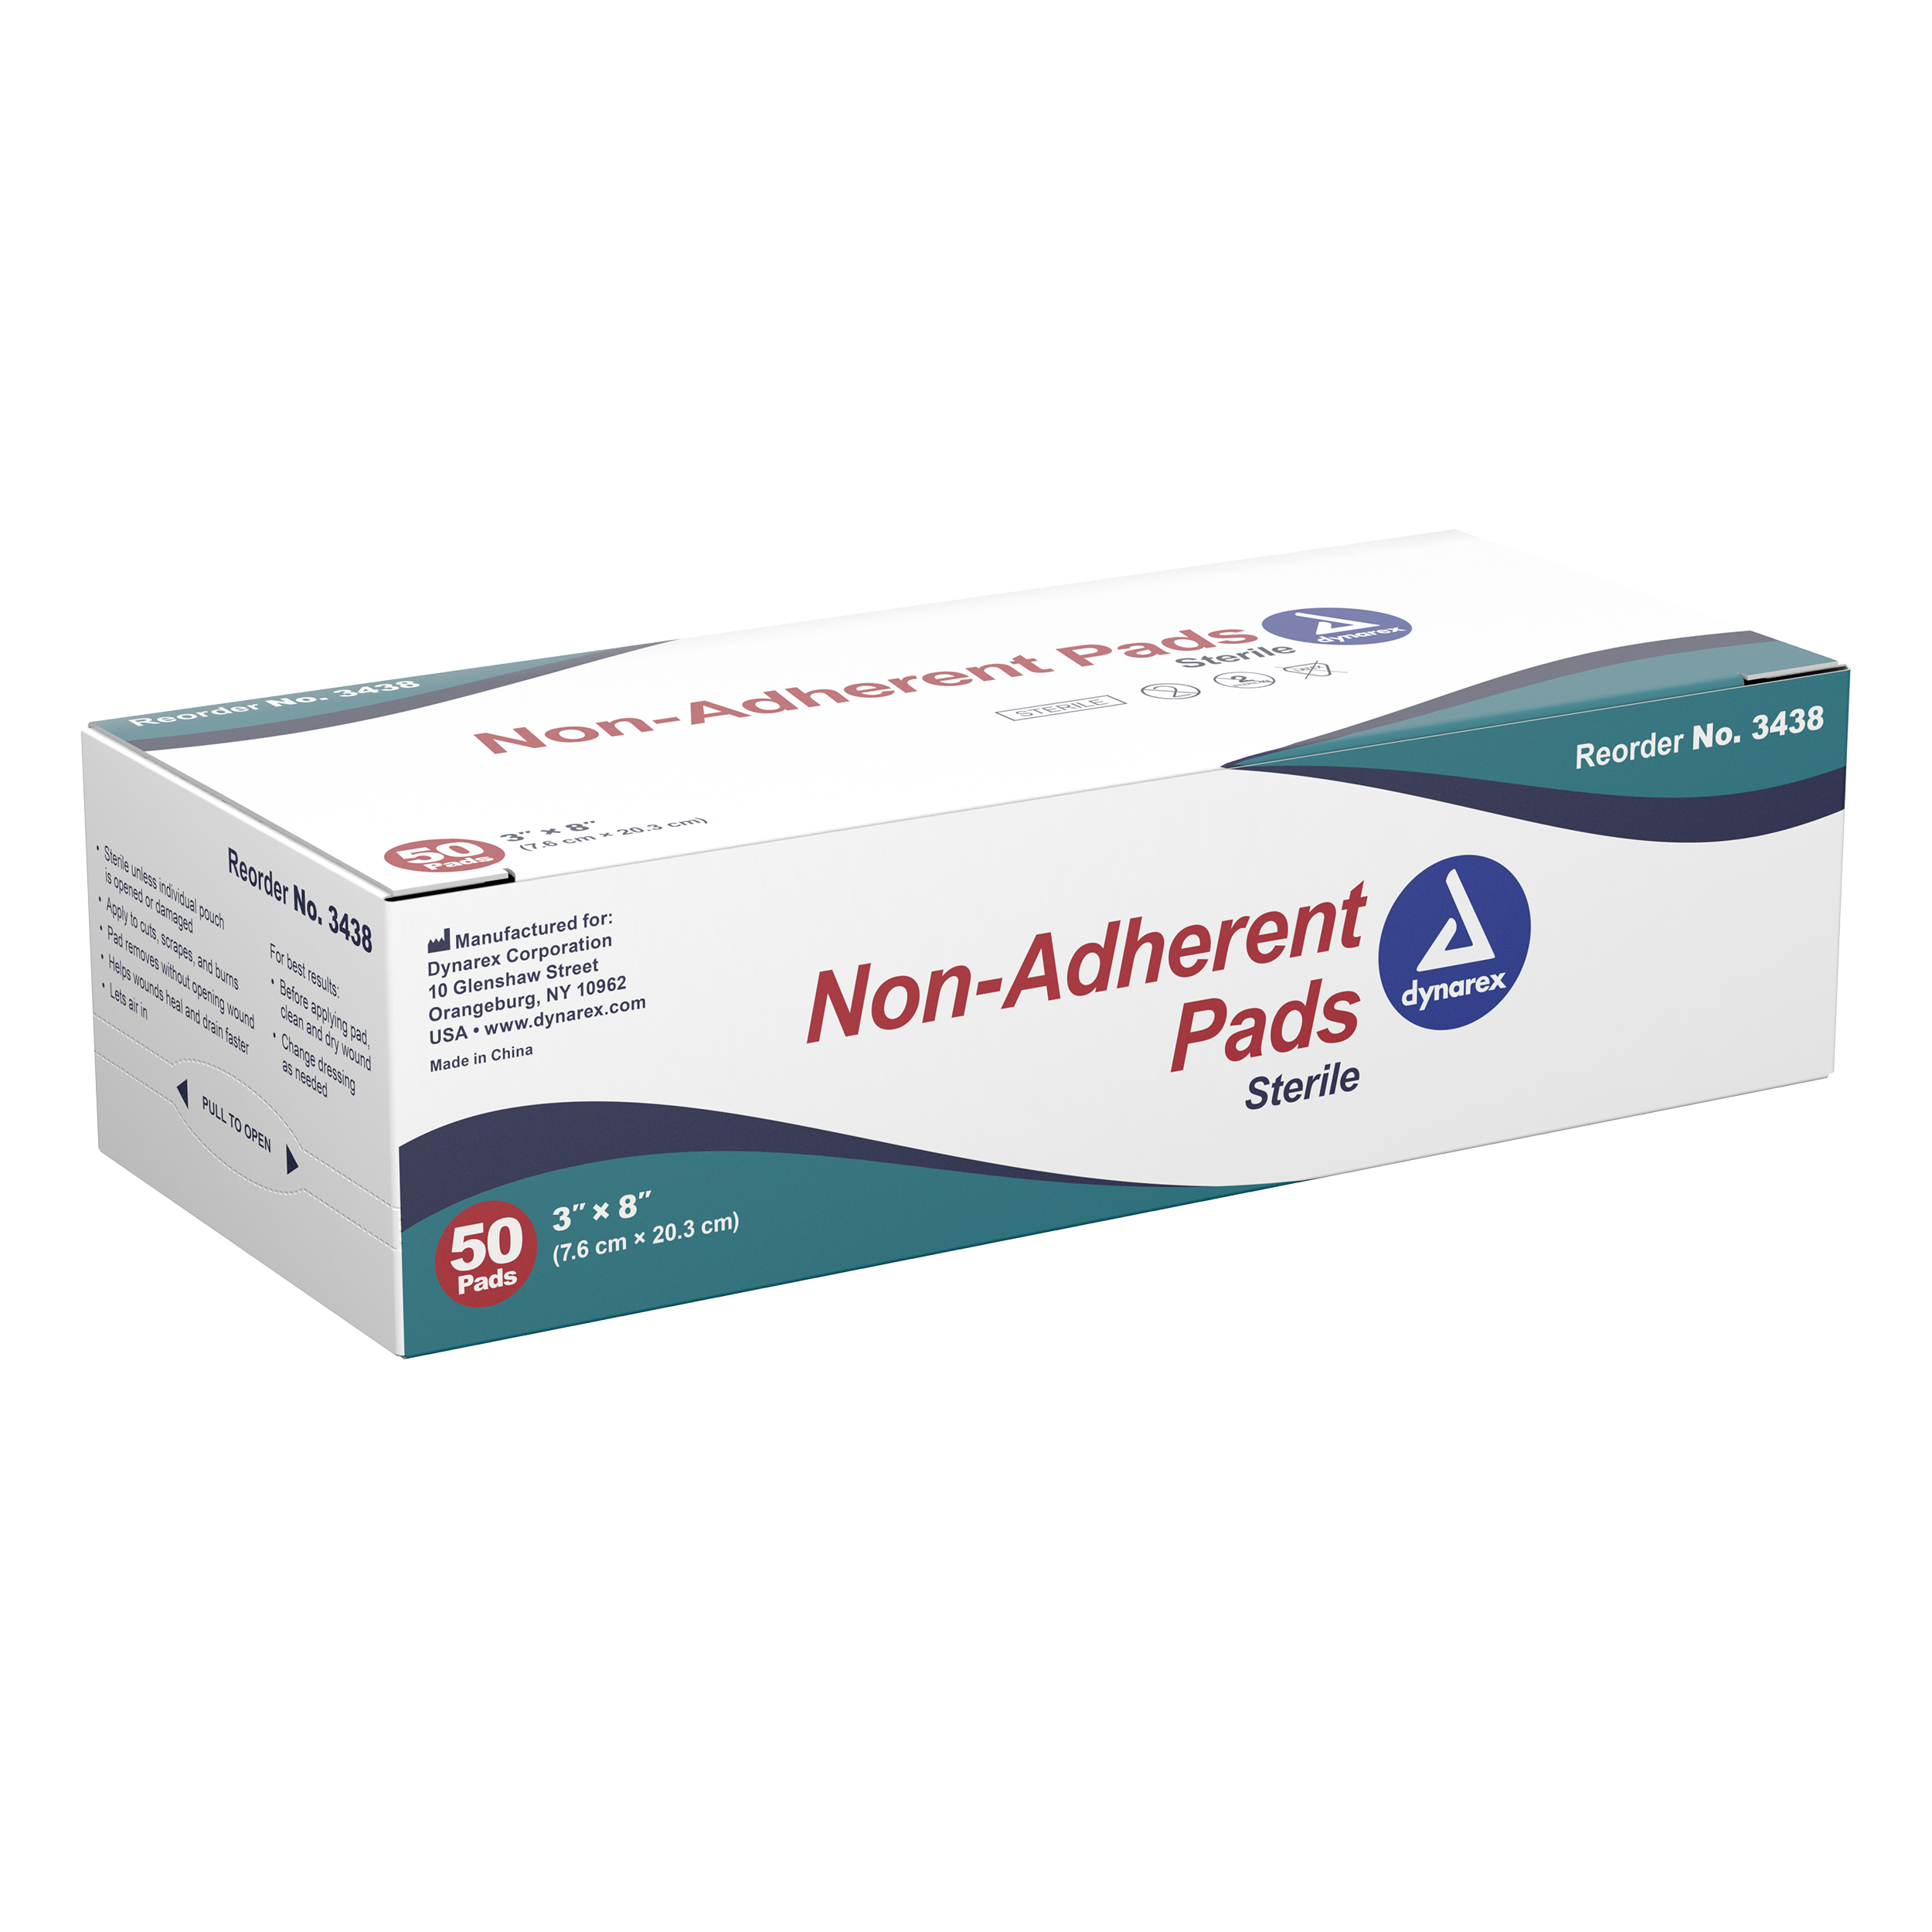 Non-Adherent Pads Sterile, 3″ X 8″